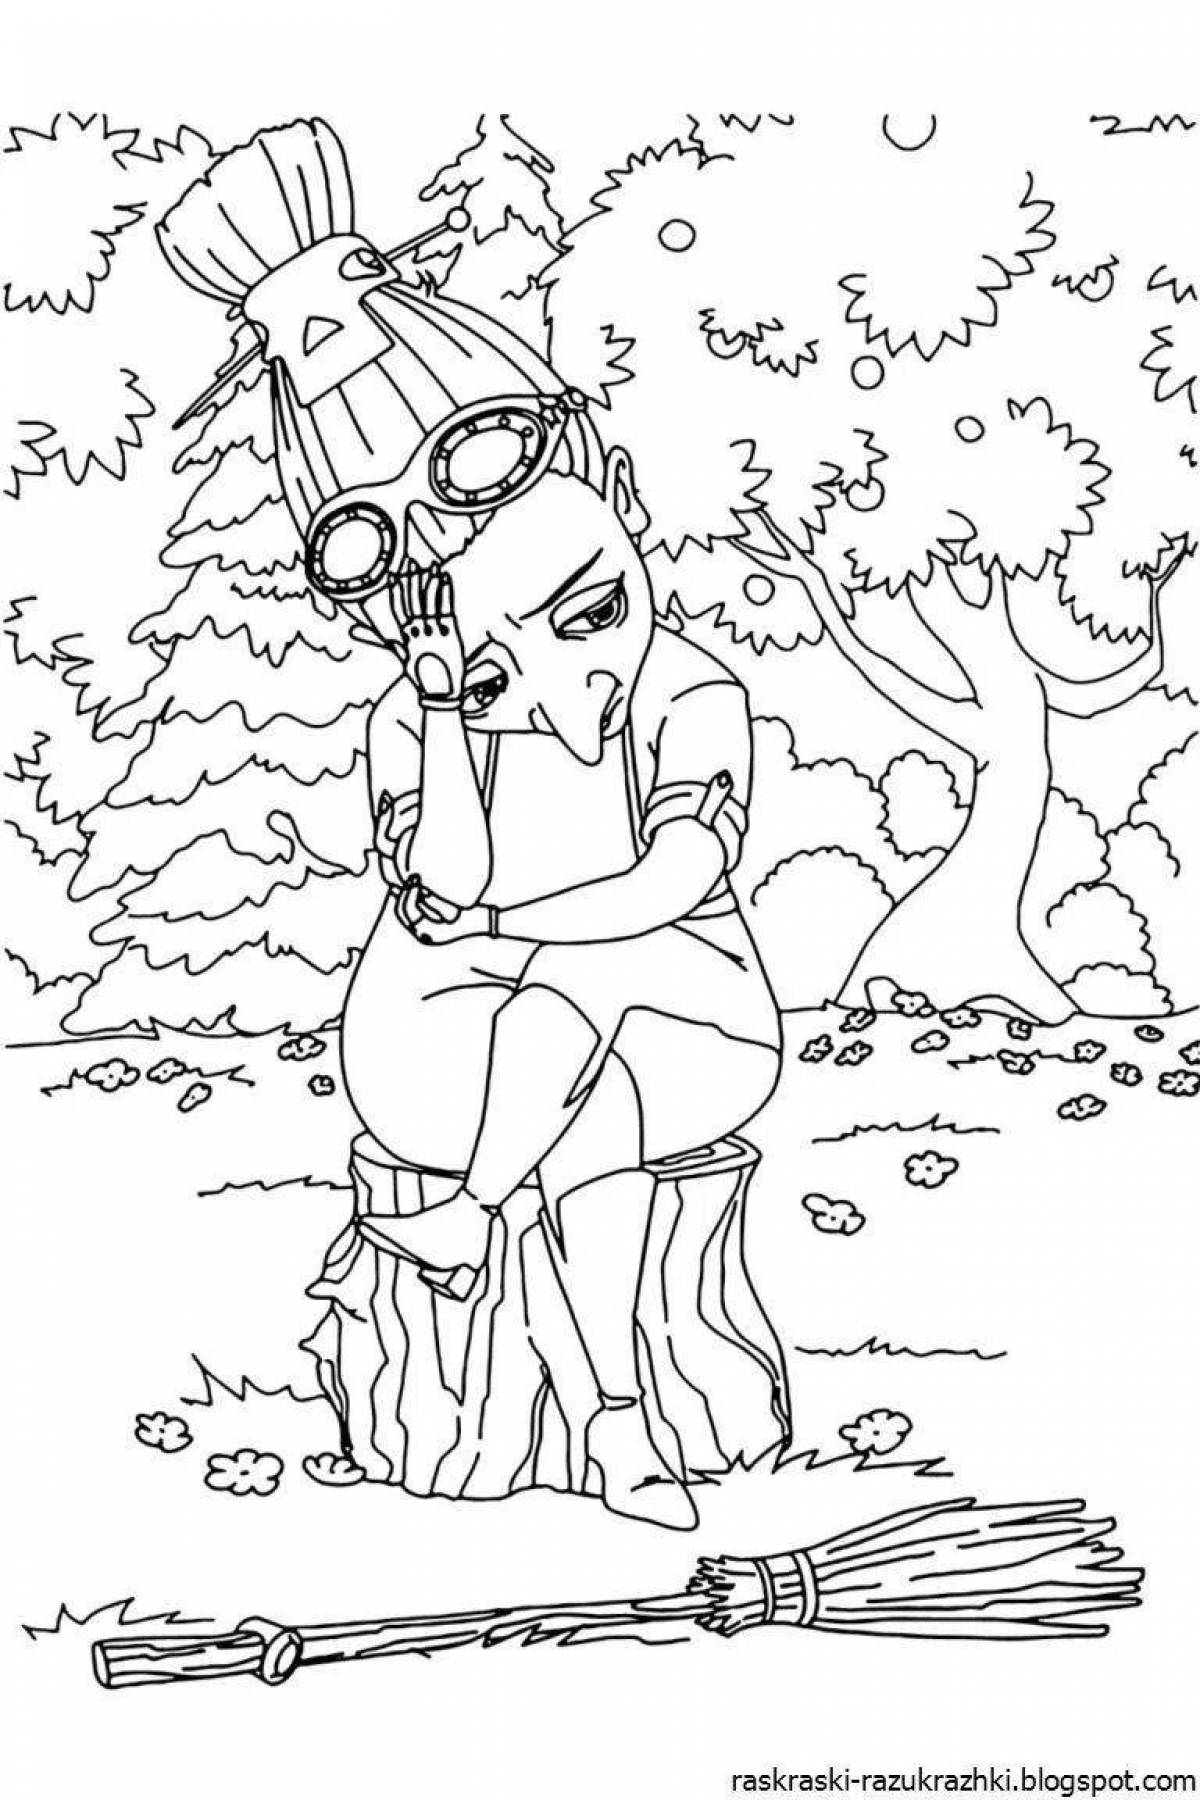 Awesome princess marlene coloring page